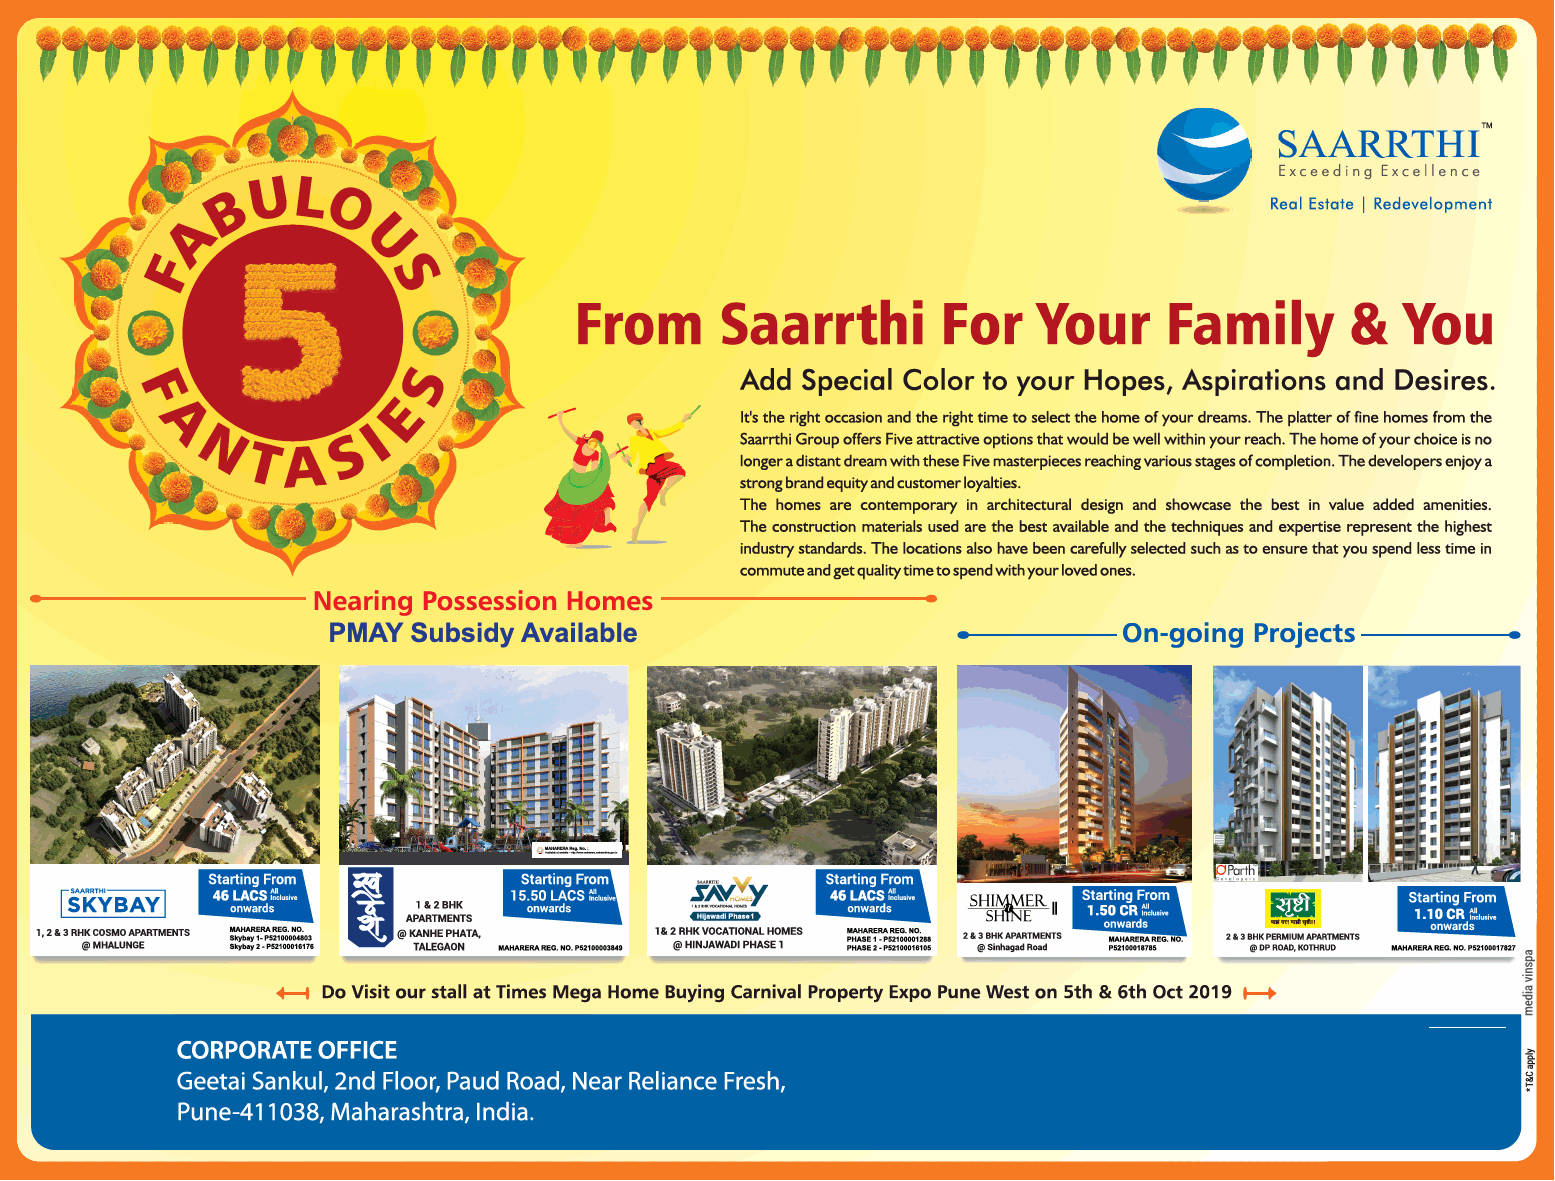 Book nearing possession homes at Saarrthi Projects, Pune Update